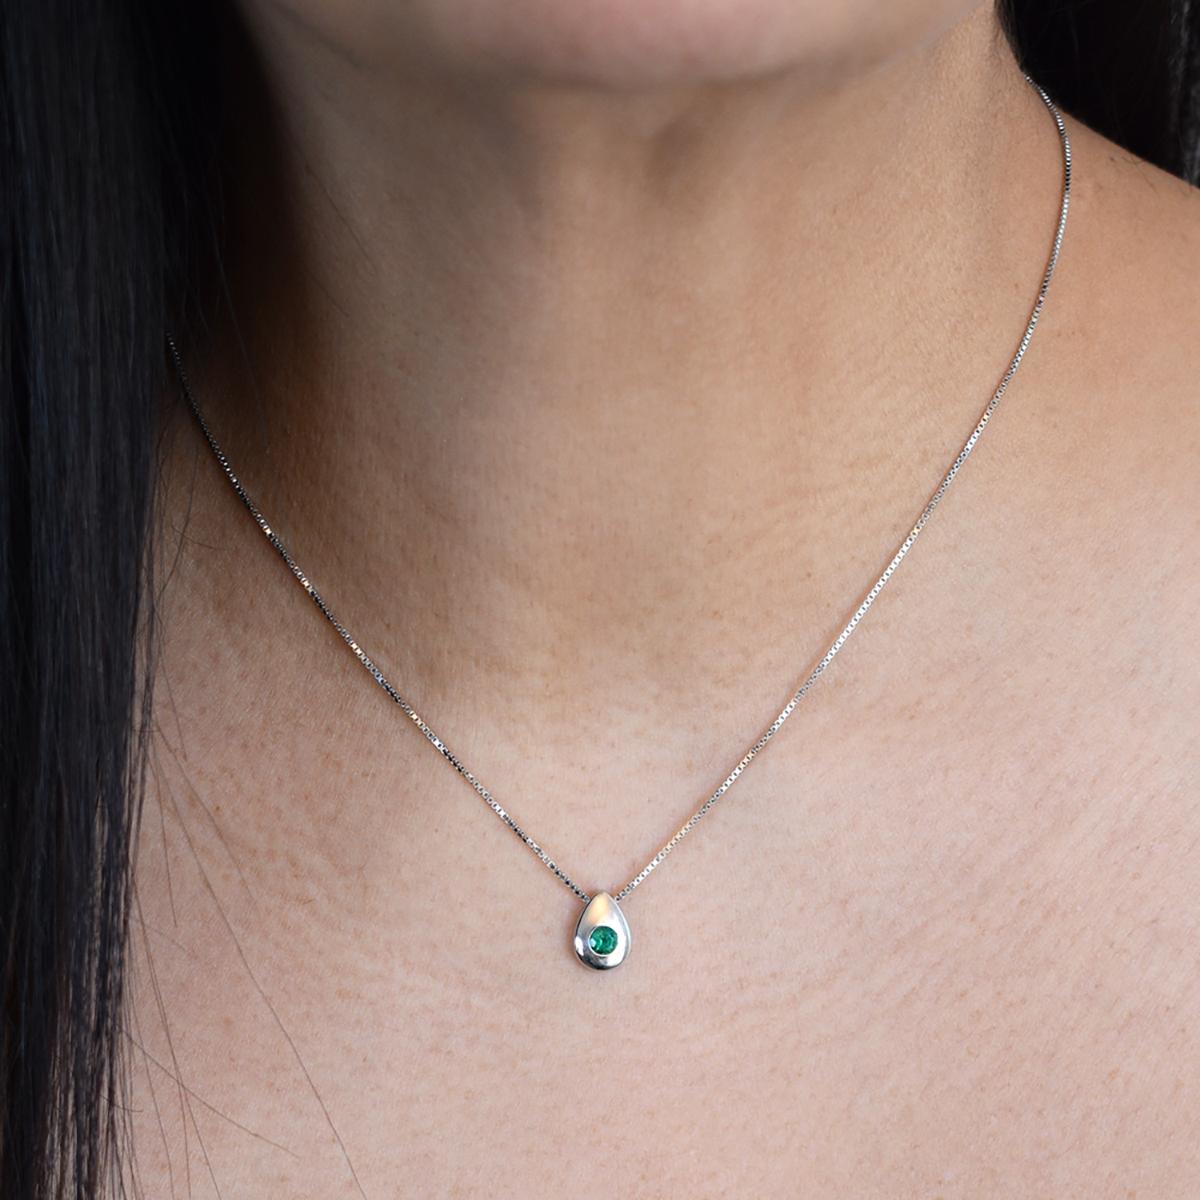 Women's or Men's Solitaire Tear Drop Emerald Necklace in White Gold Bezel Set Colombian Emerald For Sale